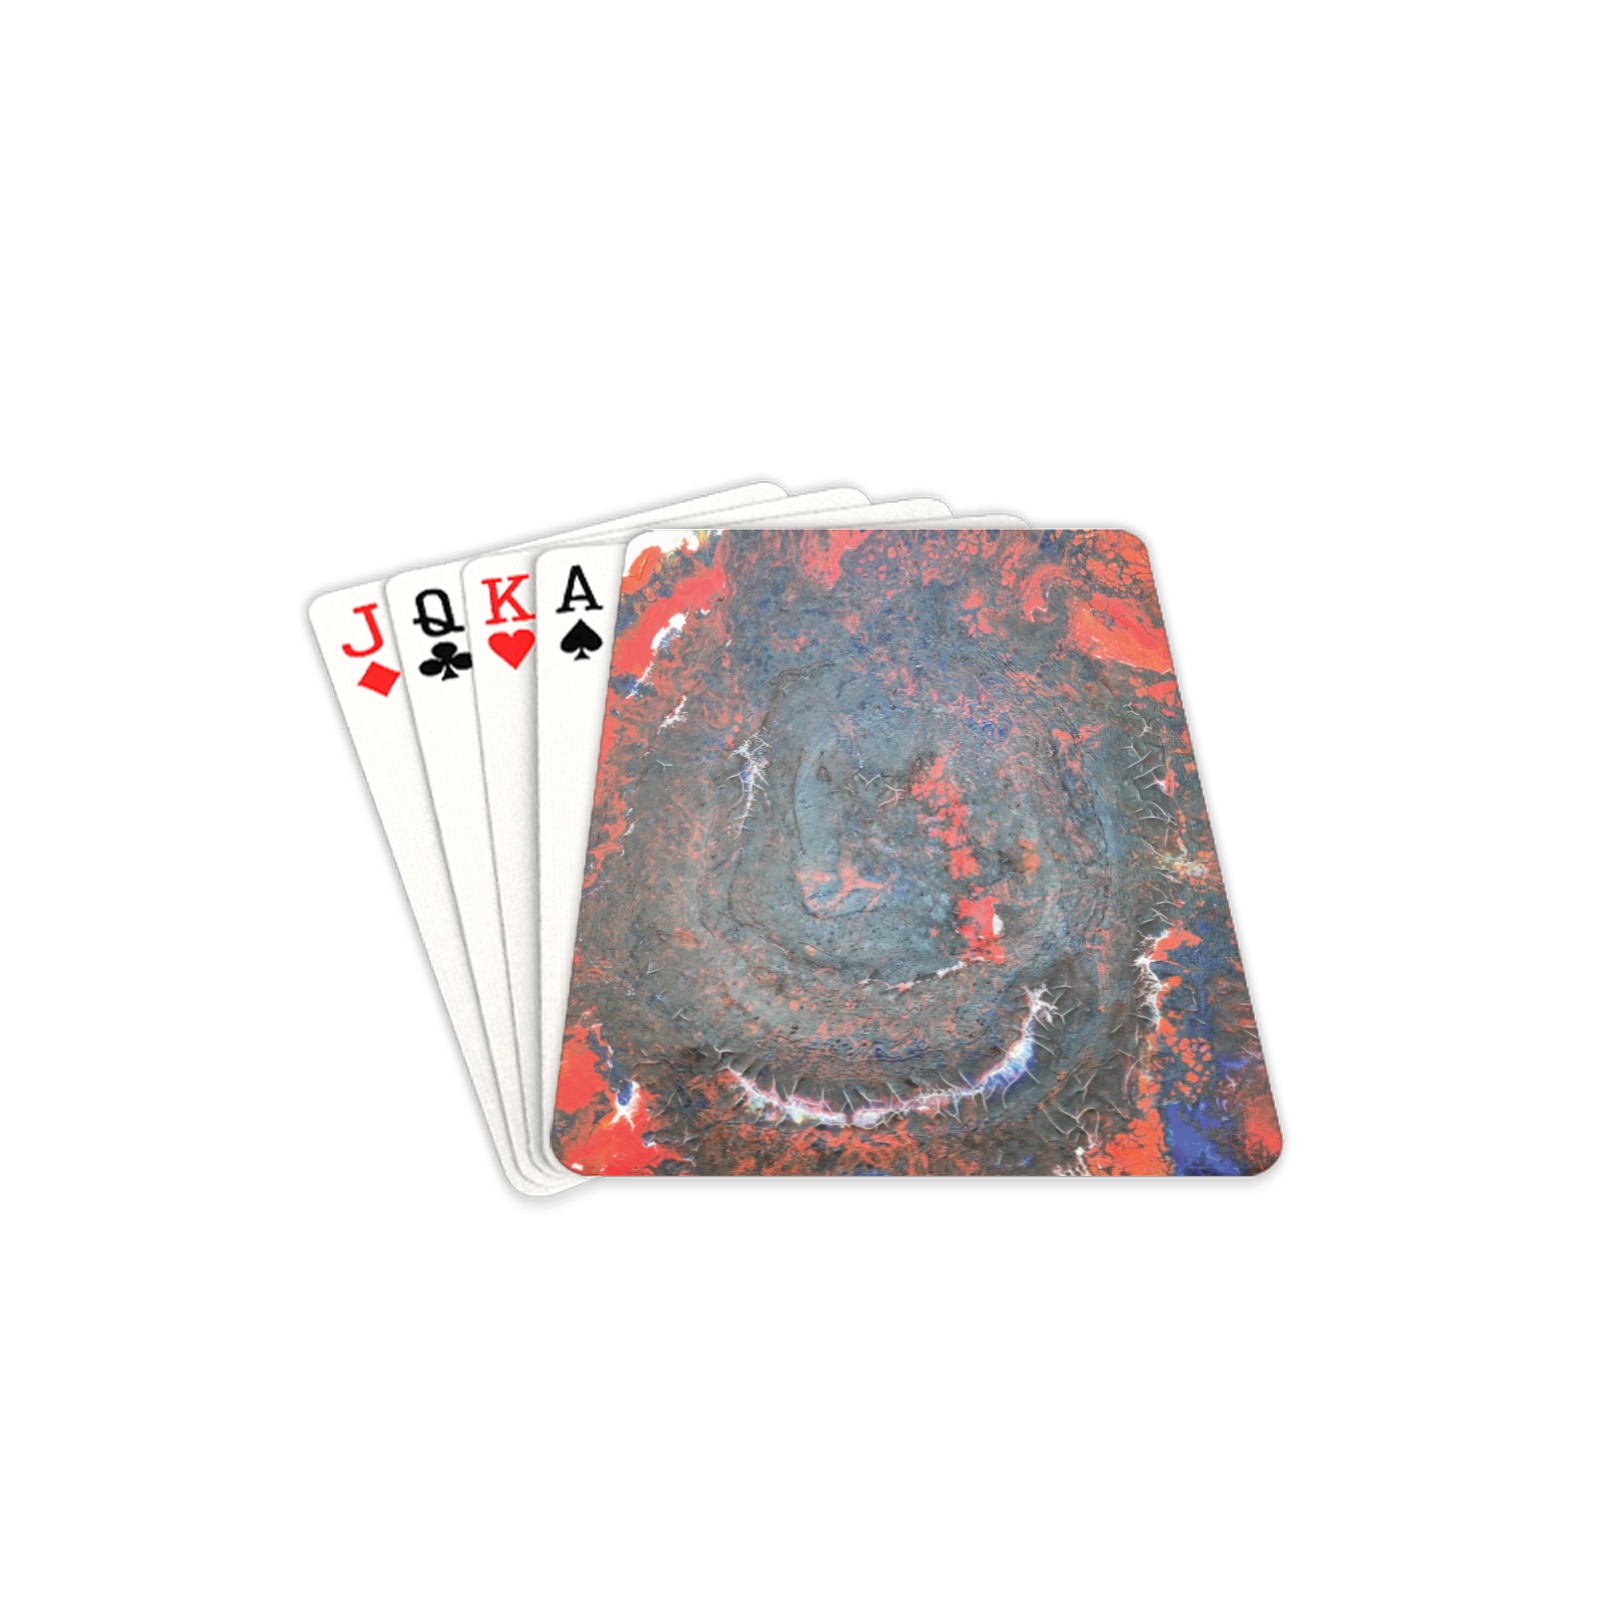 volcanic lava Playing Cards 2.5"x3.5"